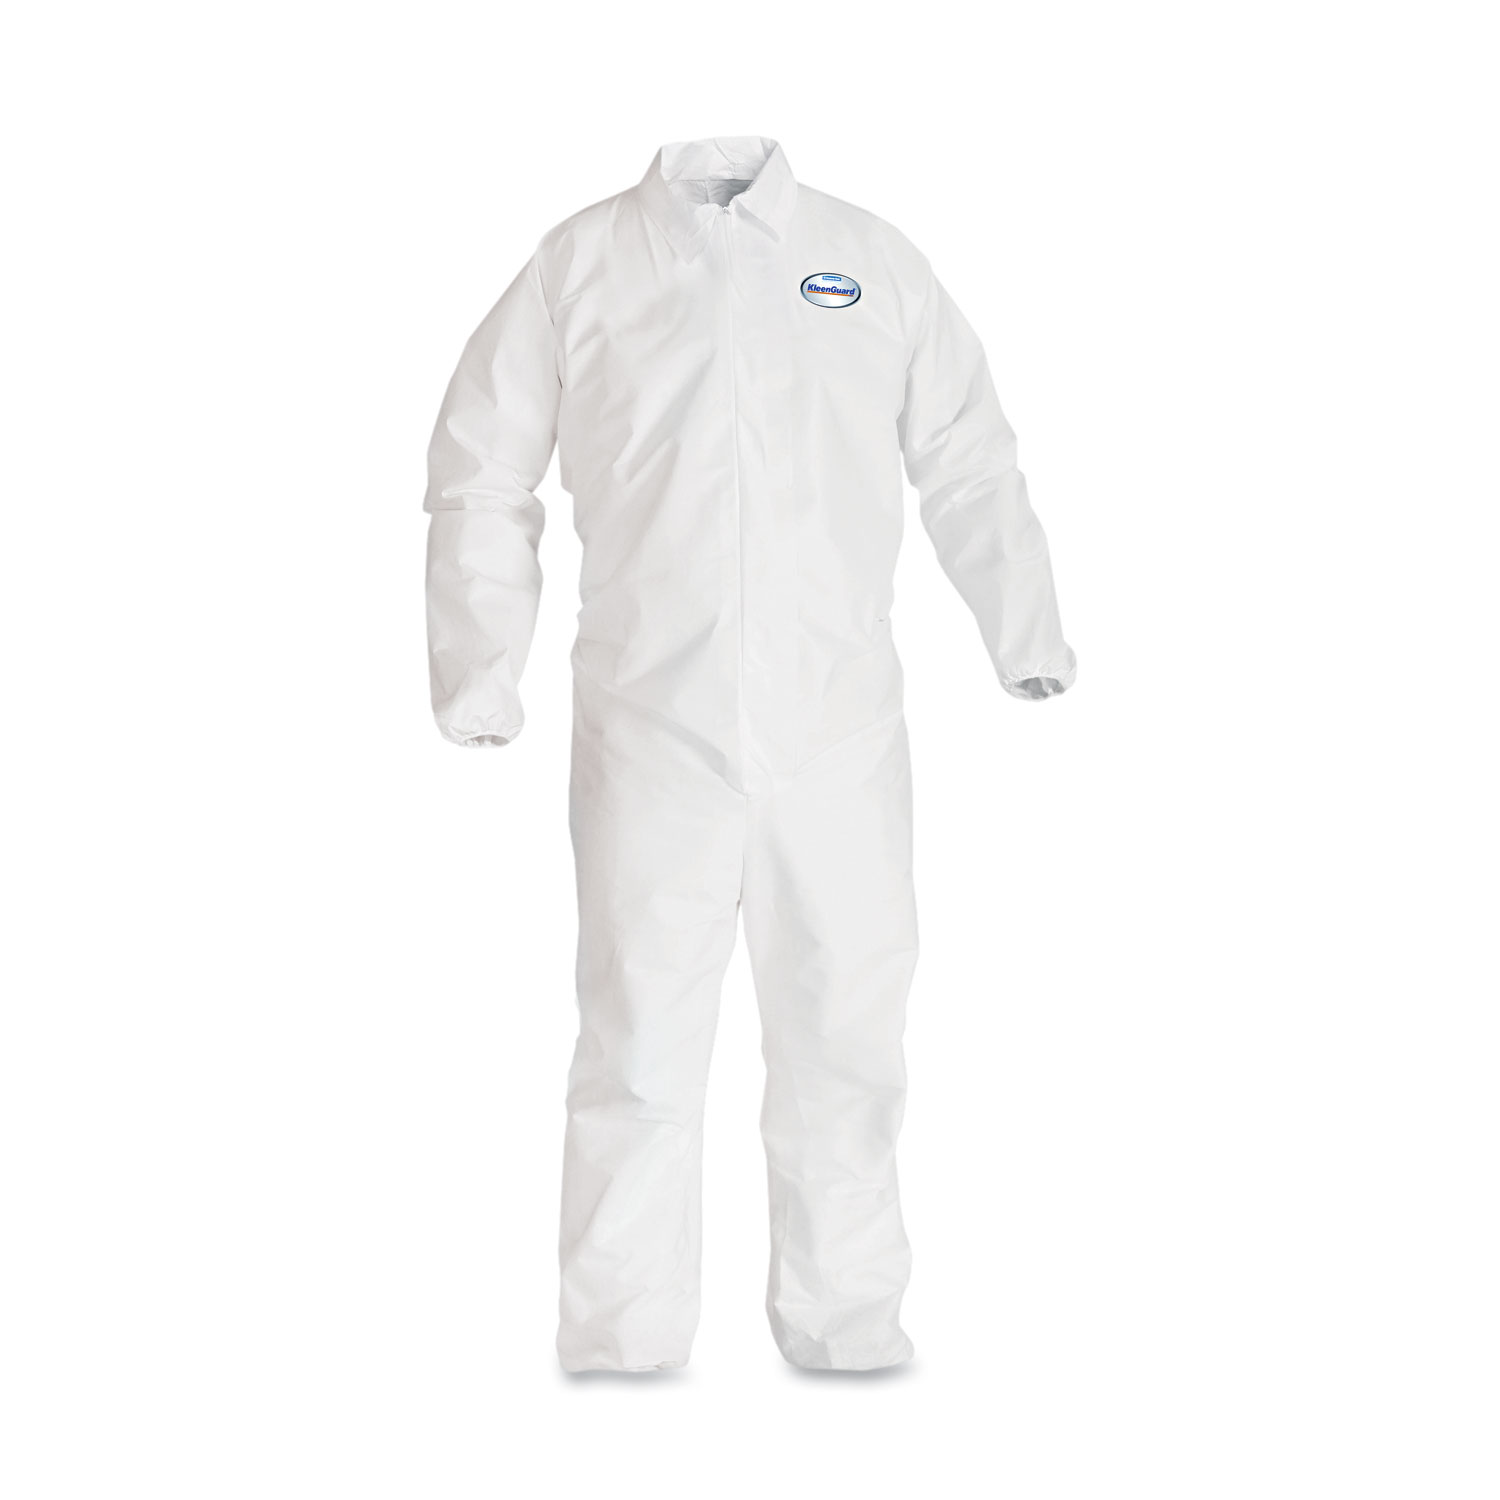 A40 Elastic-Cuff and Ankles Coveralls, White, 2X-Large, 25/Case